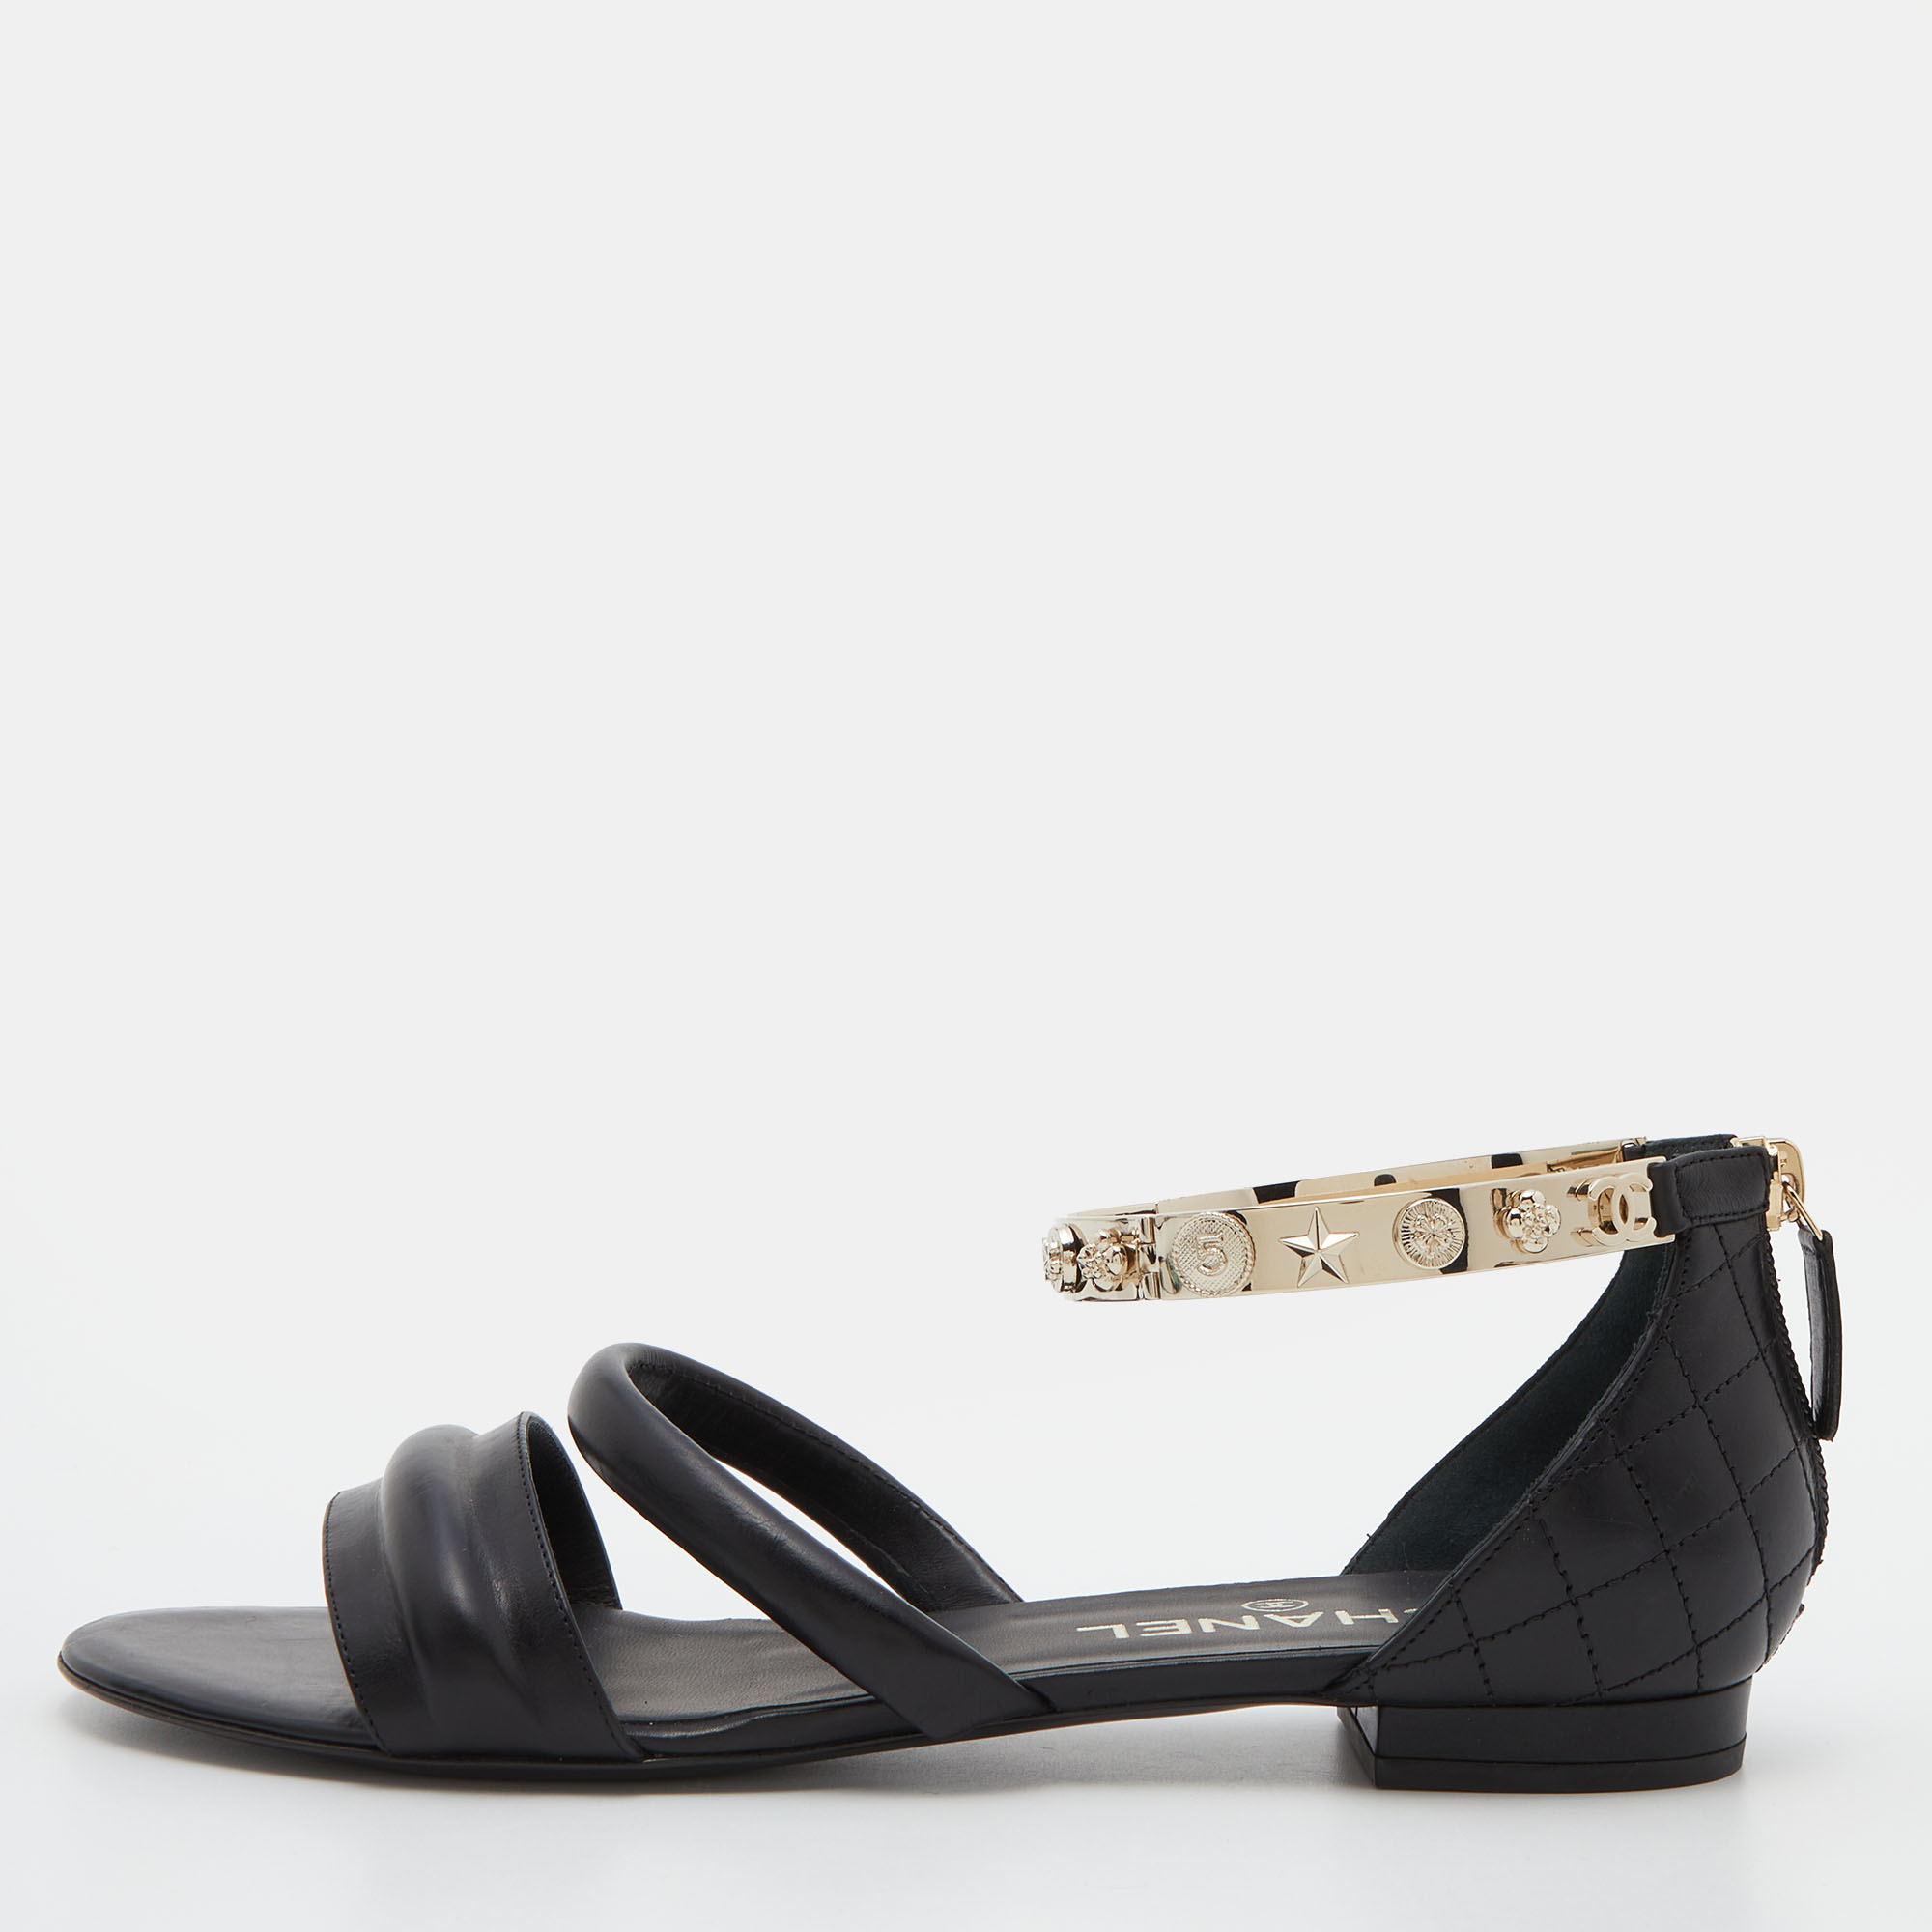 CHANEL Pre-Owned 1990's Bow Details Sandals - Farfetch